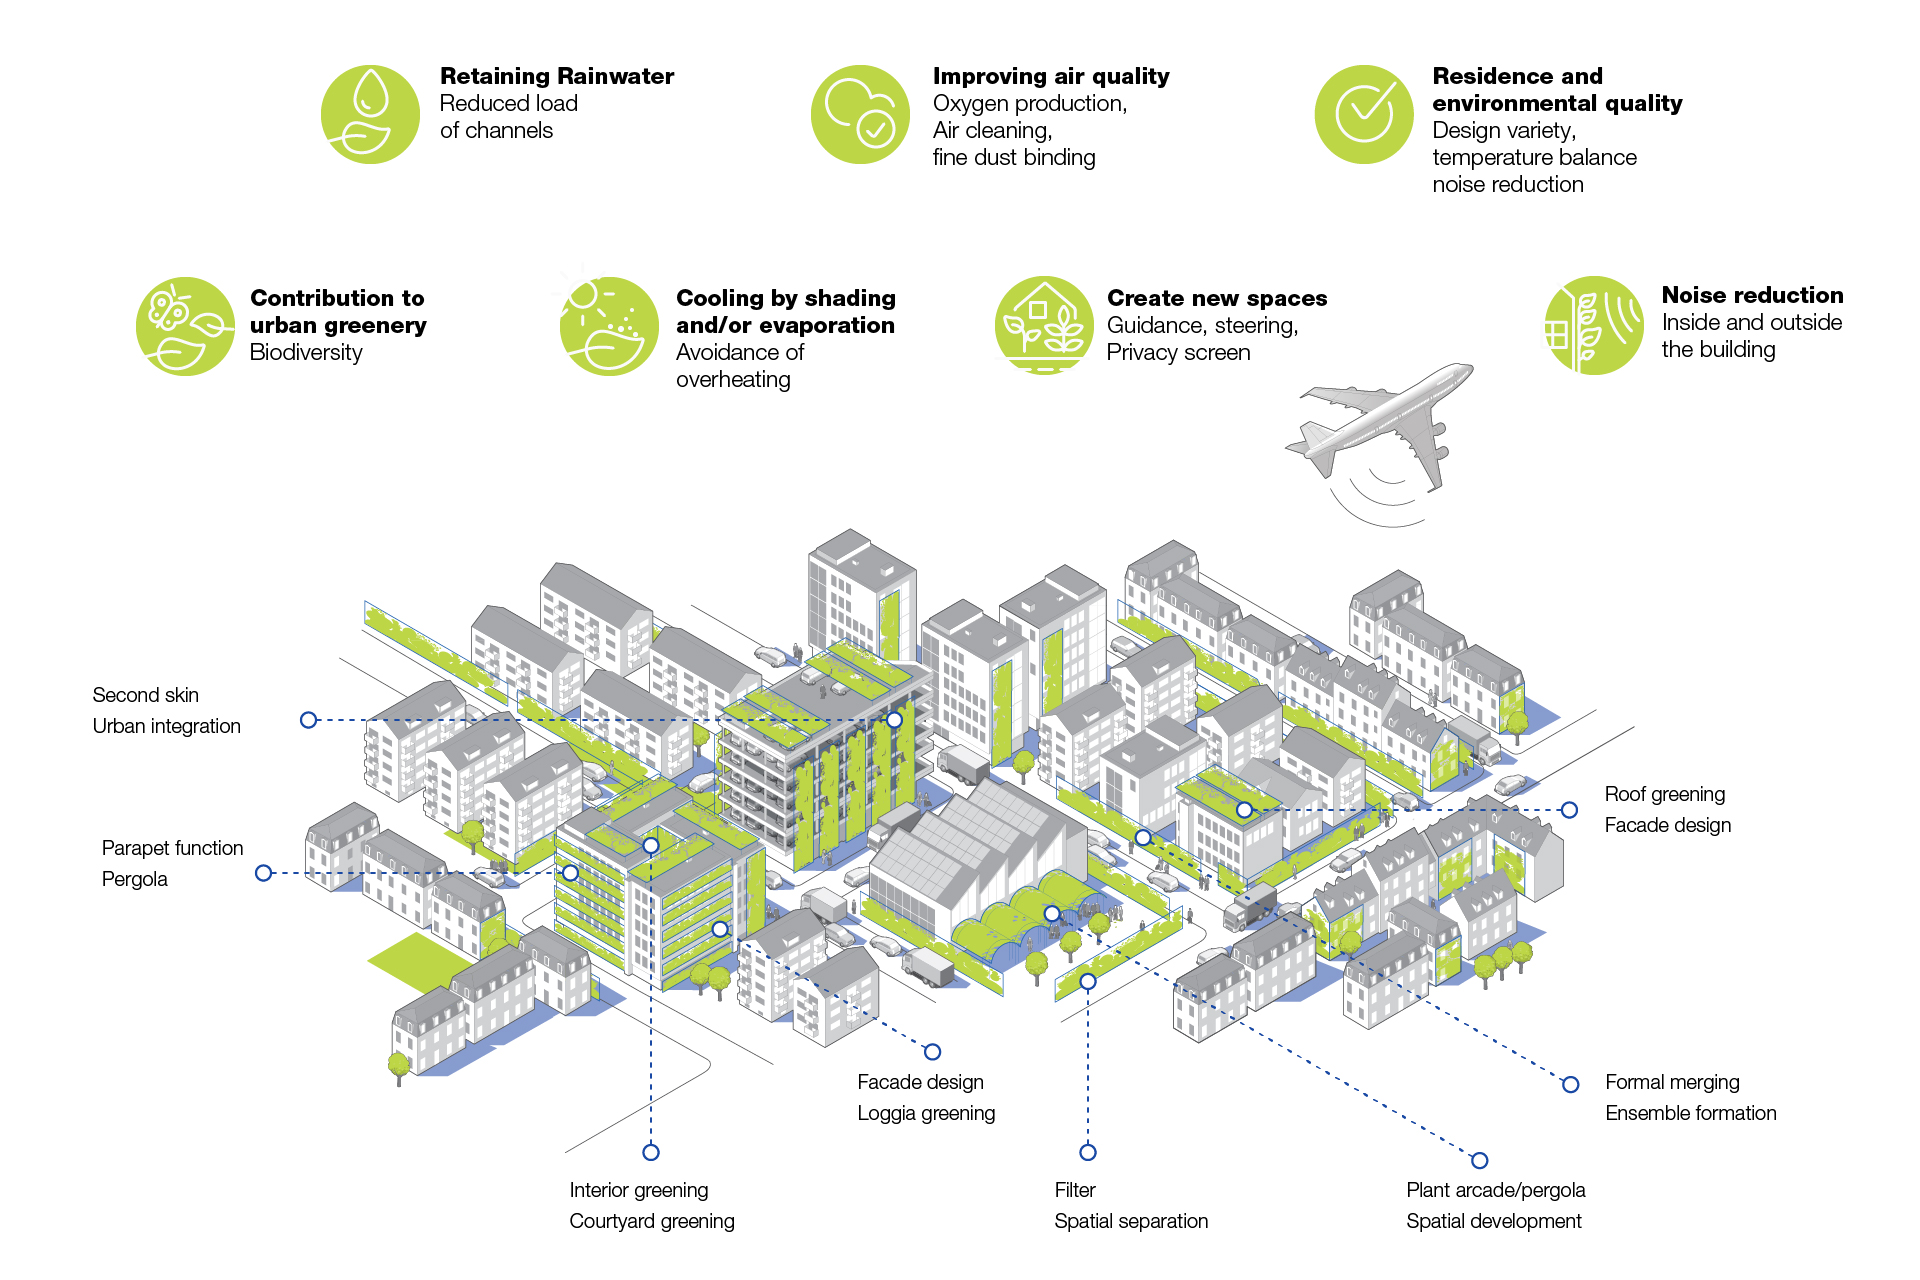 [Translate to Japan (JP), Japanese (Default):] Infographic with the benefits of greening in urban areas